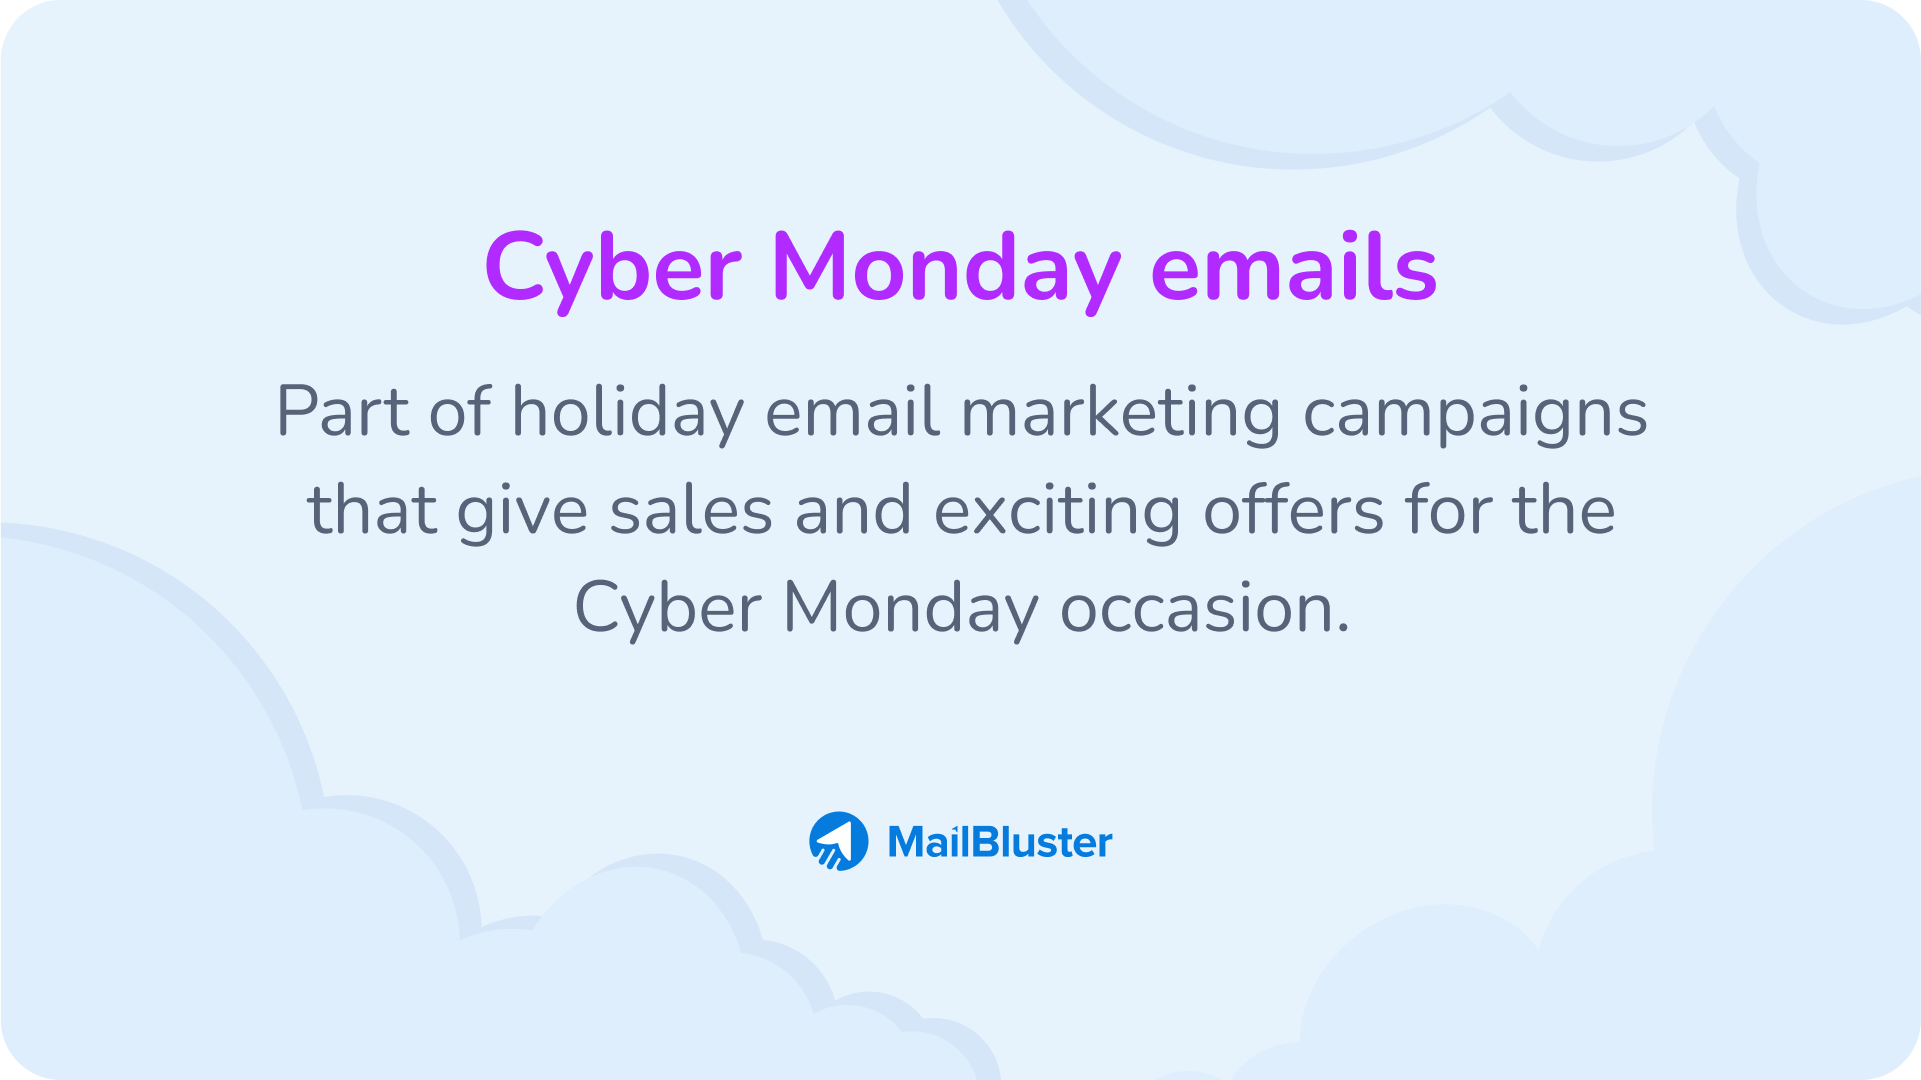 What is Cyber Monday Emails?